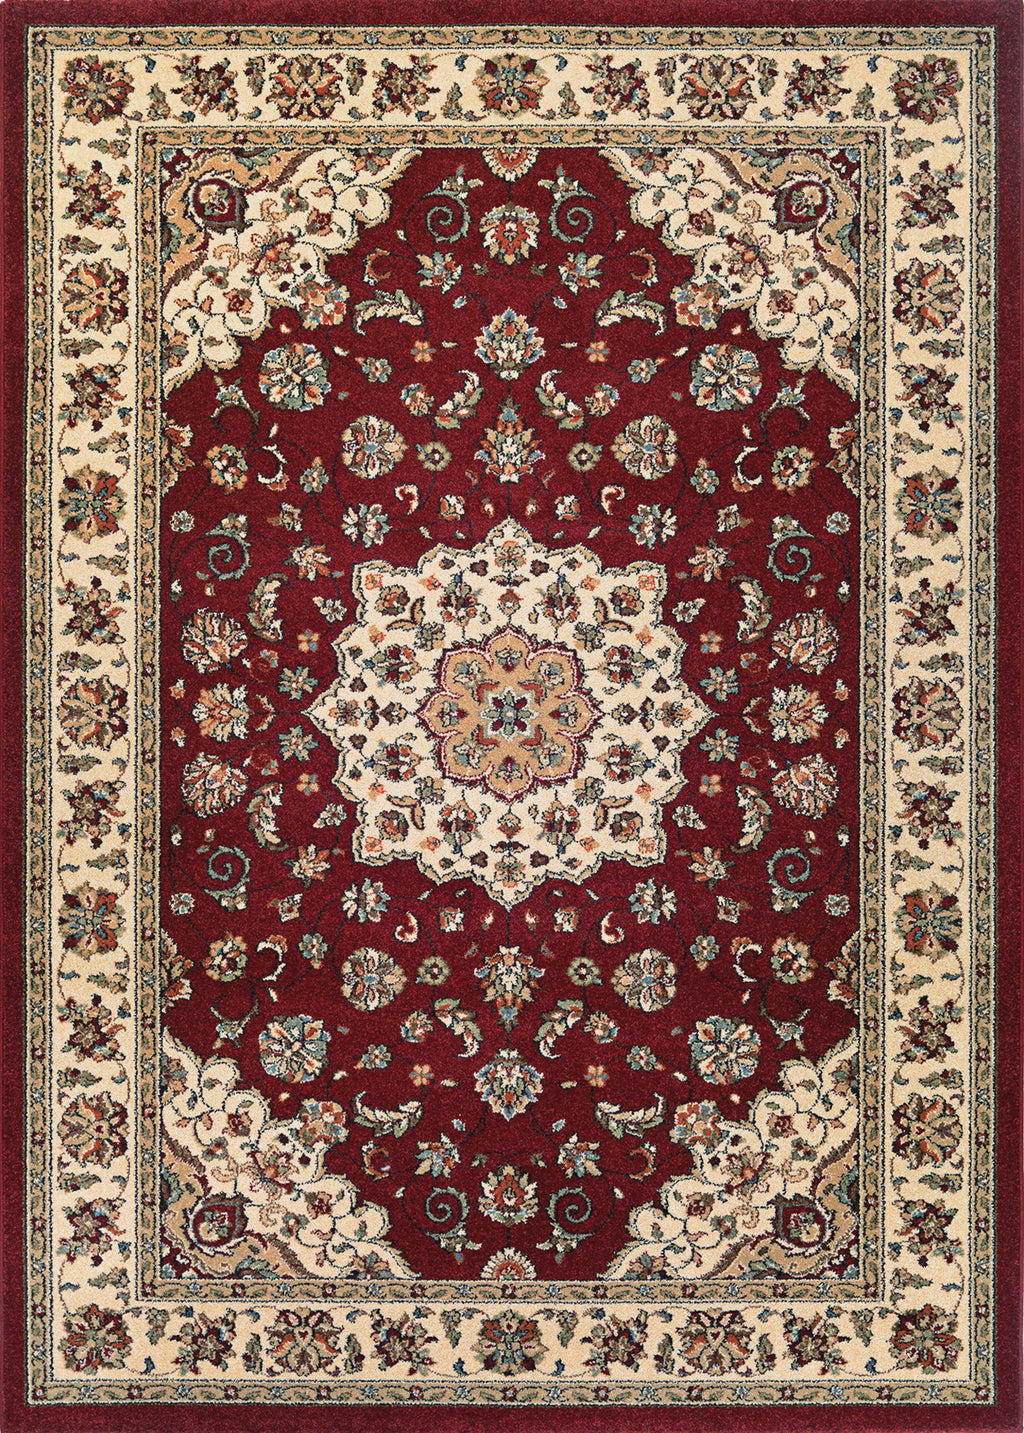 Couristan Traditions Namur Ruby/Ivory Area Rug